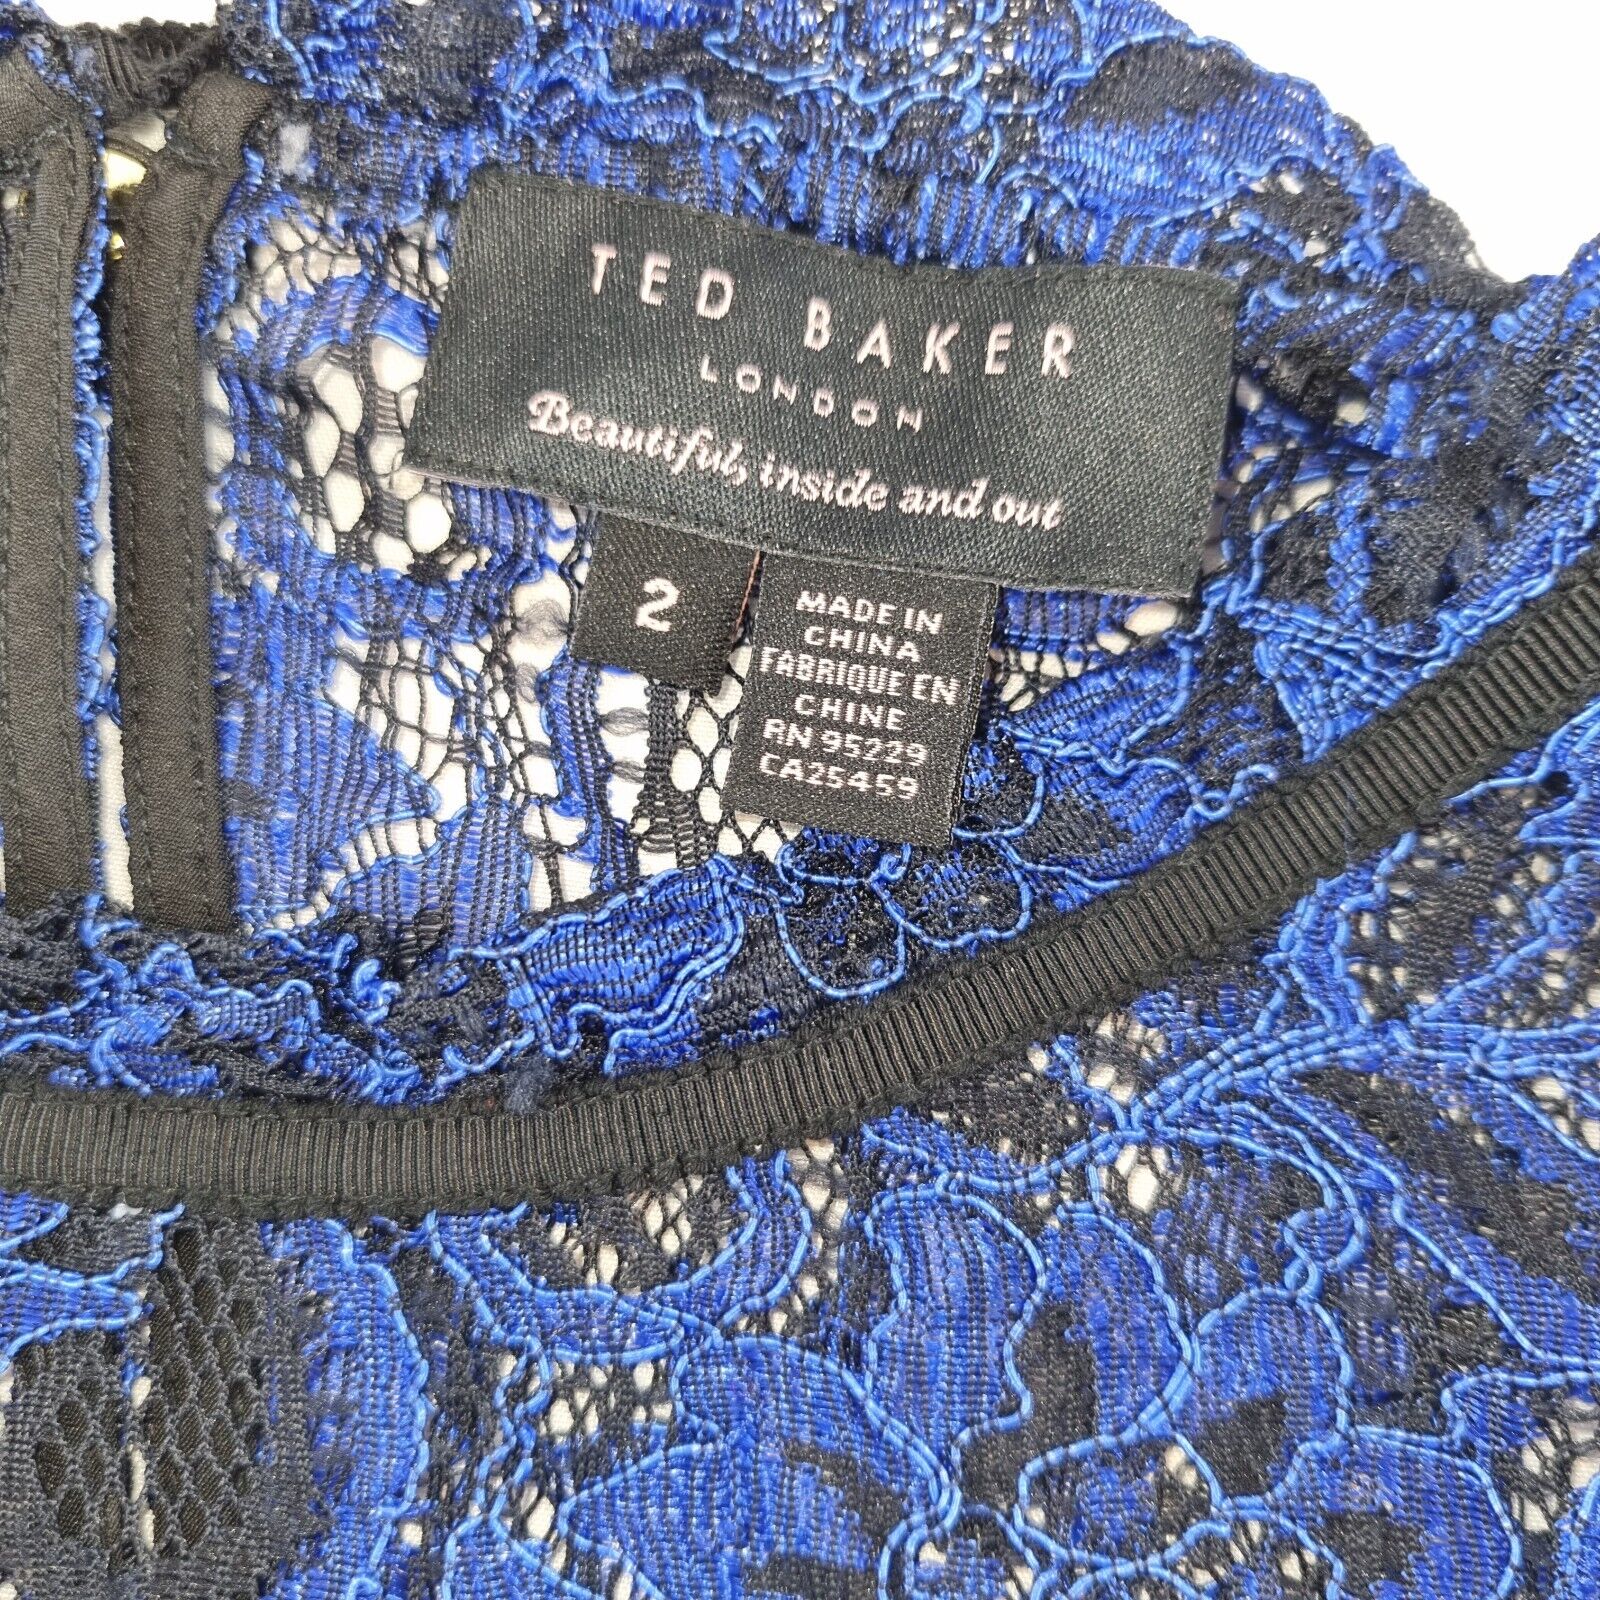 Ted Baker Womens Lace Top With Black Under Dress UK Size 10 Bright Pretty Blue - Bonnie Lassio